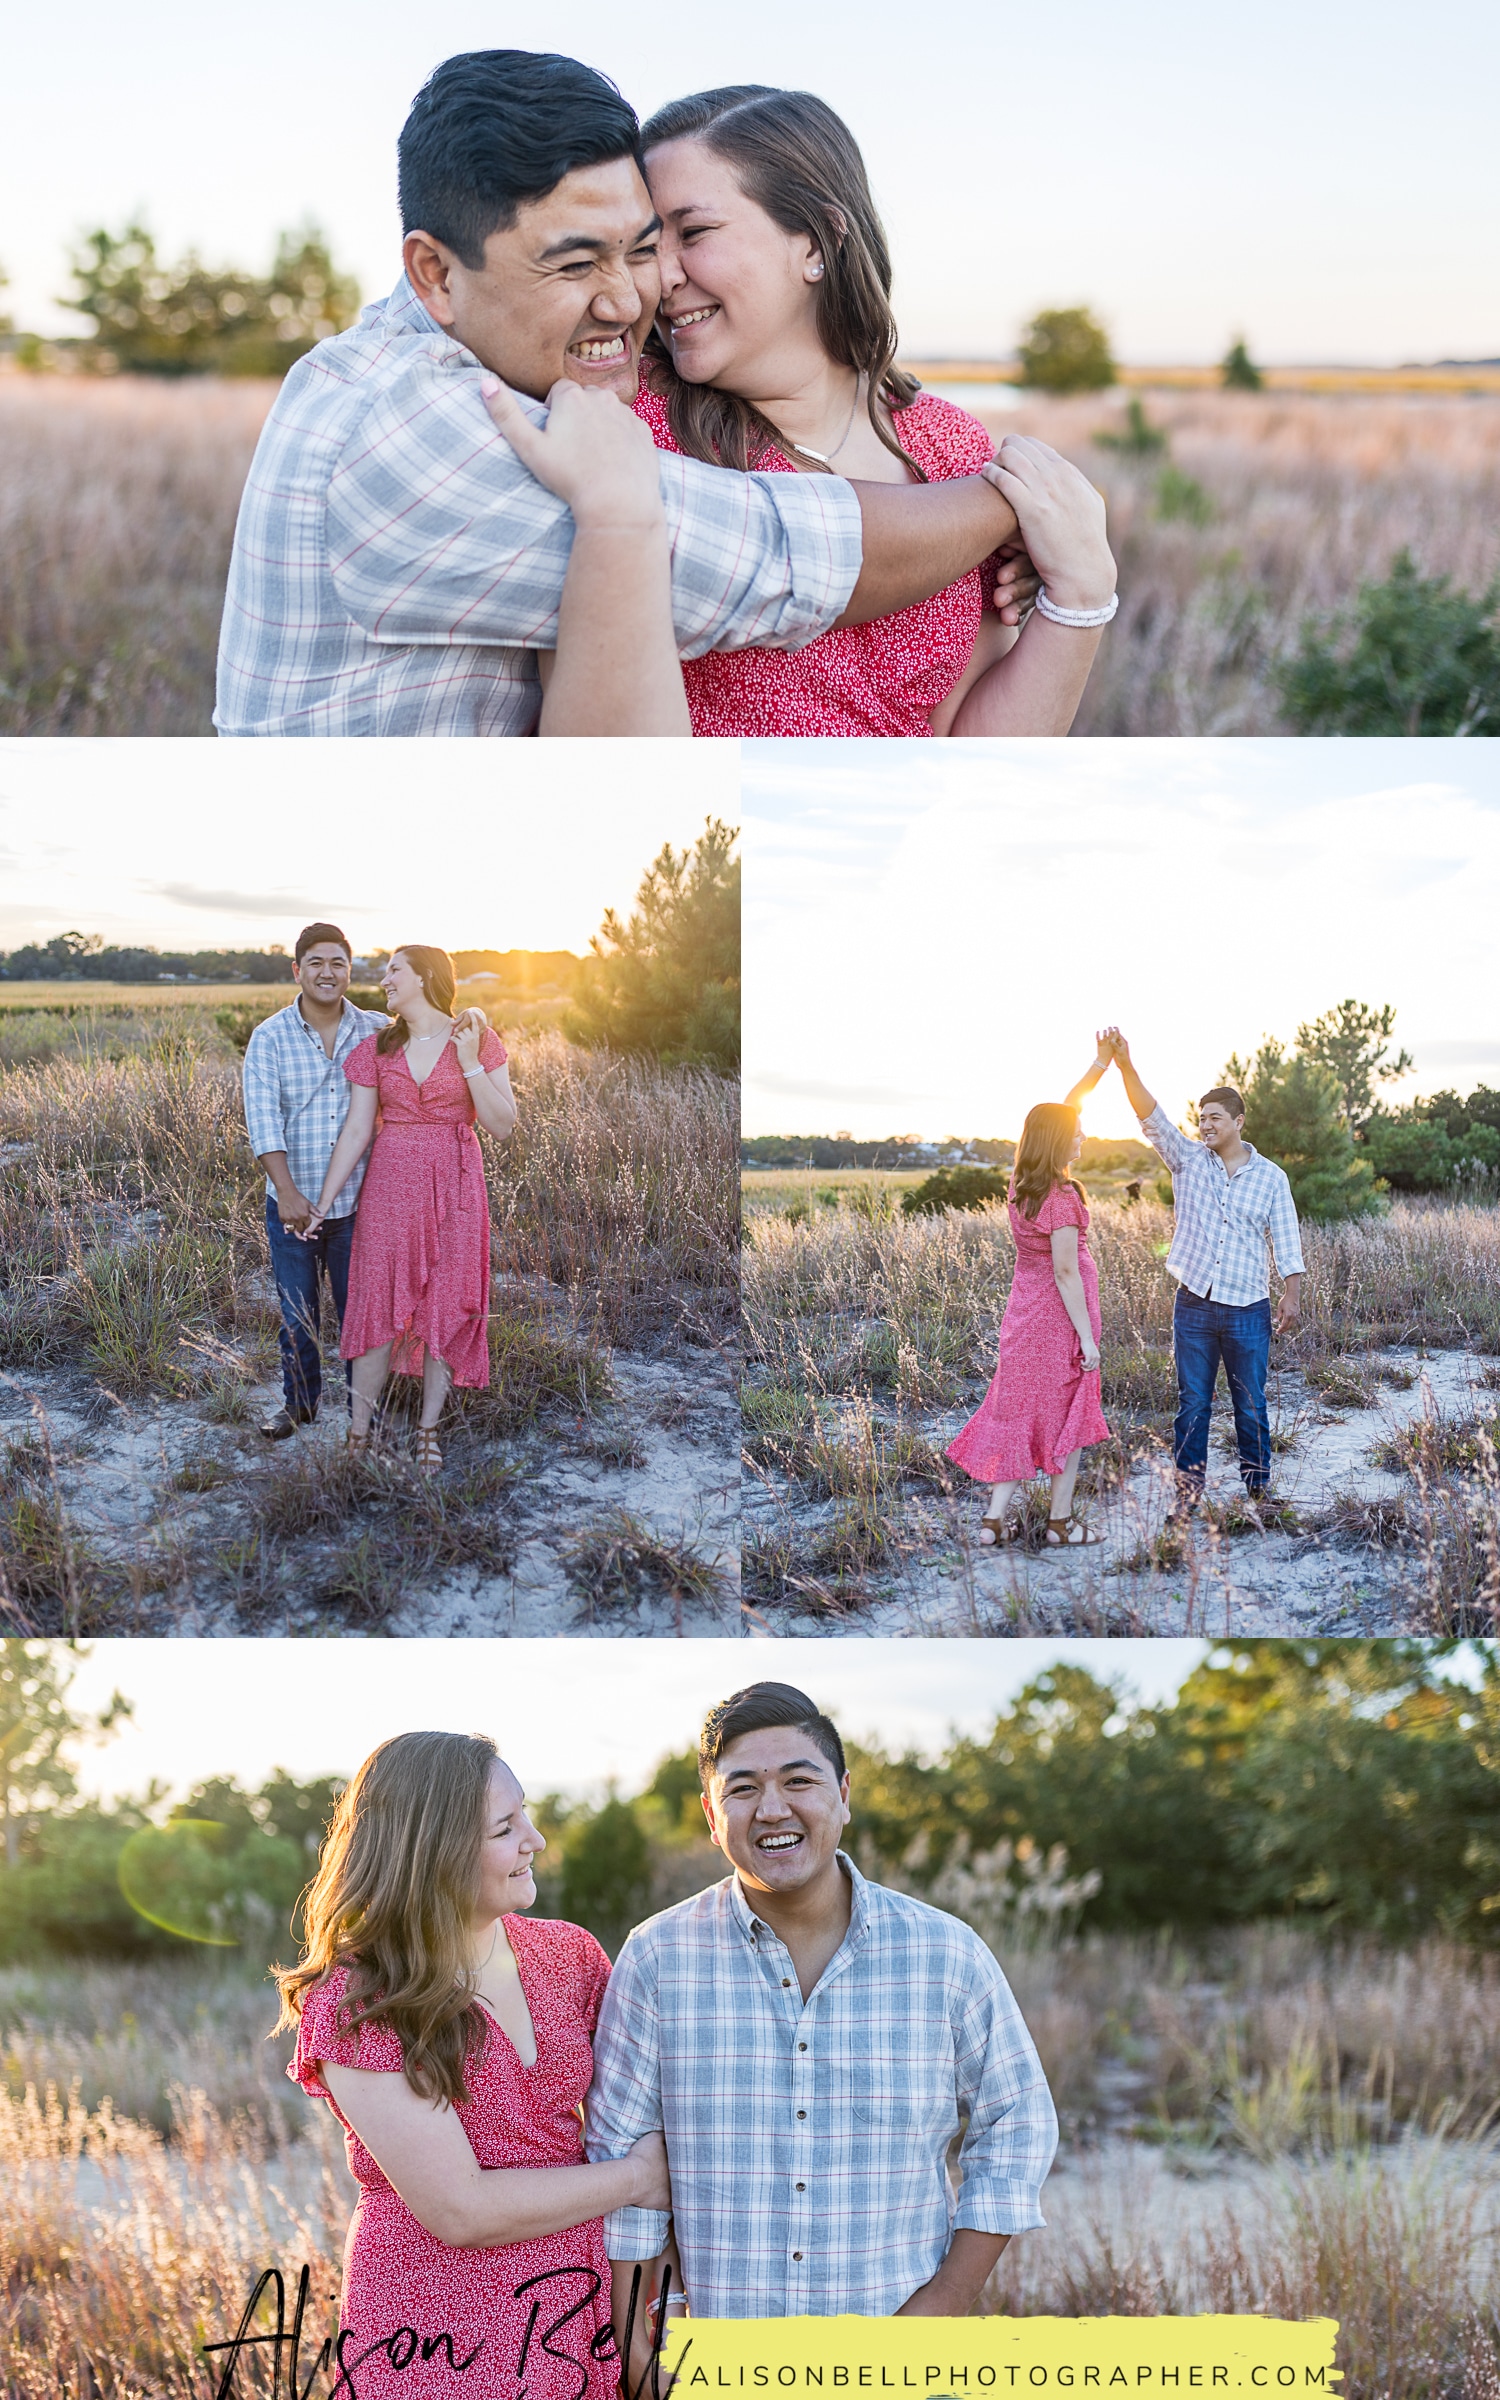 Fall mini sessions at pleasure house point natural area in Virginia beach with alison bell photographer